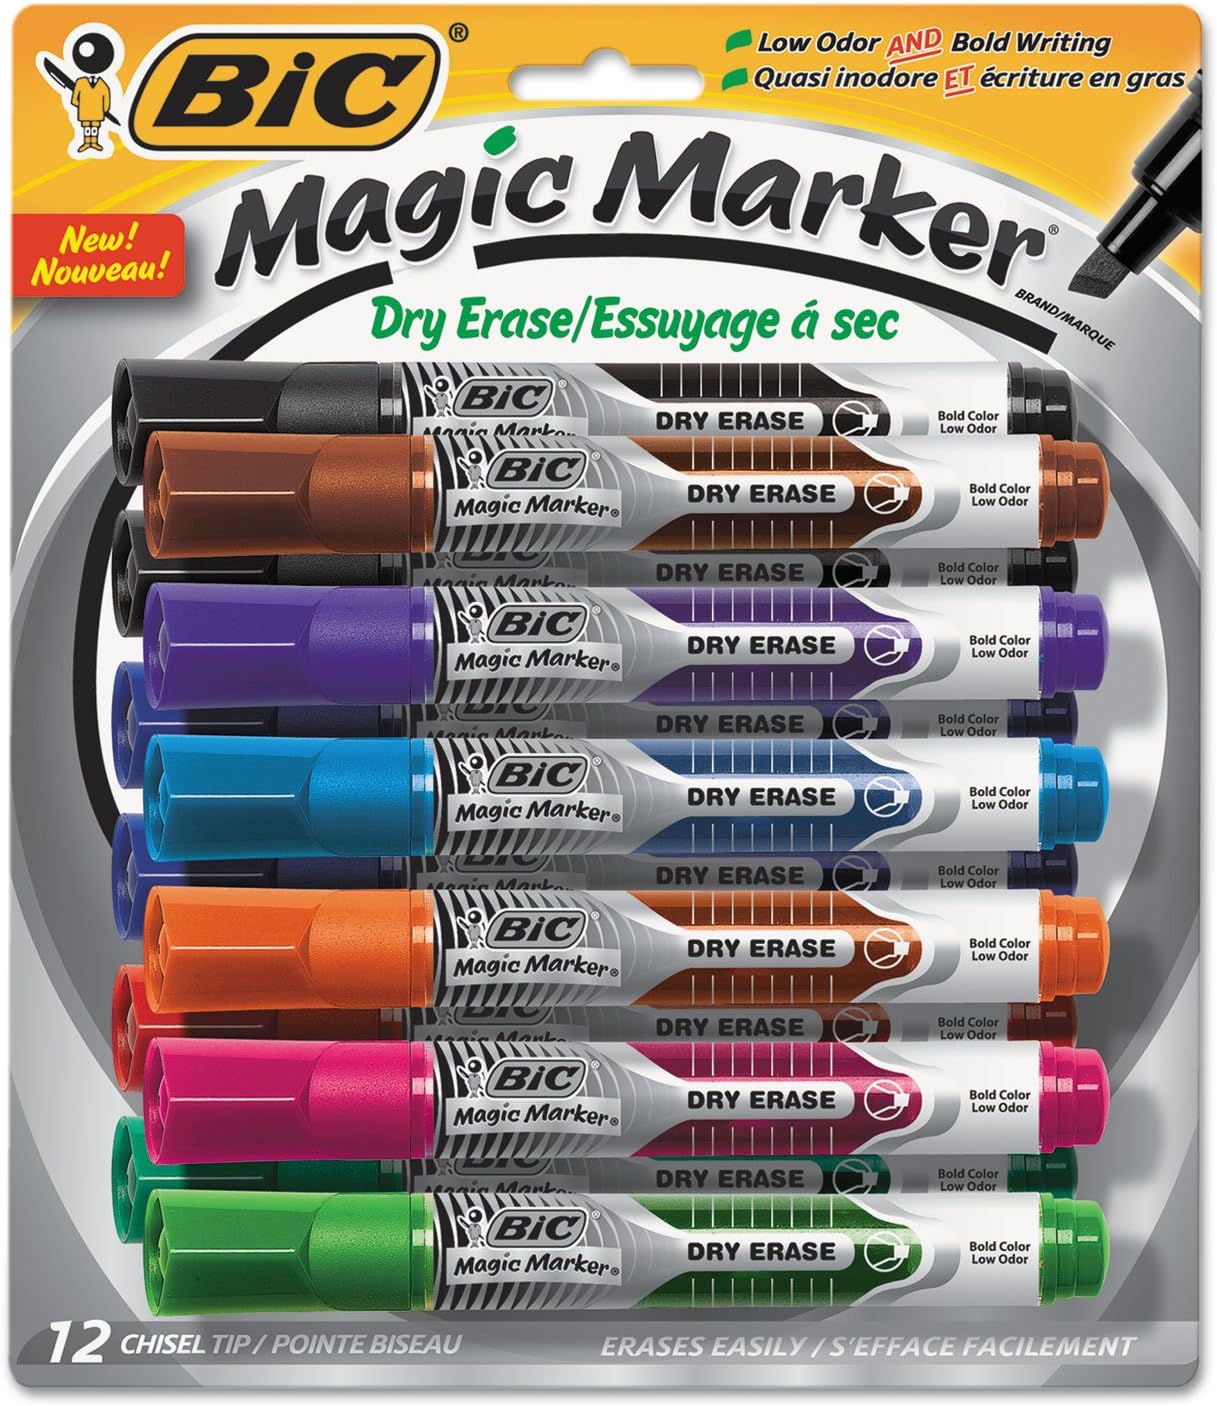 These markers are my favorite. The colors are intense and last until the last drop of ink. Would be a perfect gift for any teacher in your life! They erase cleanly on the first pass and can write a long time. Love the variety in colors